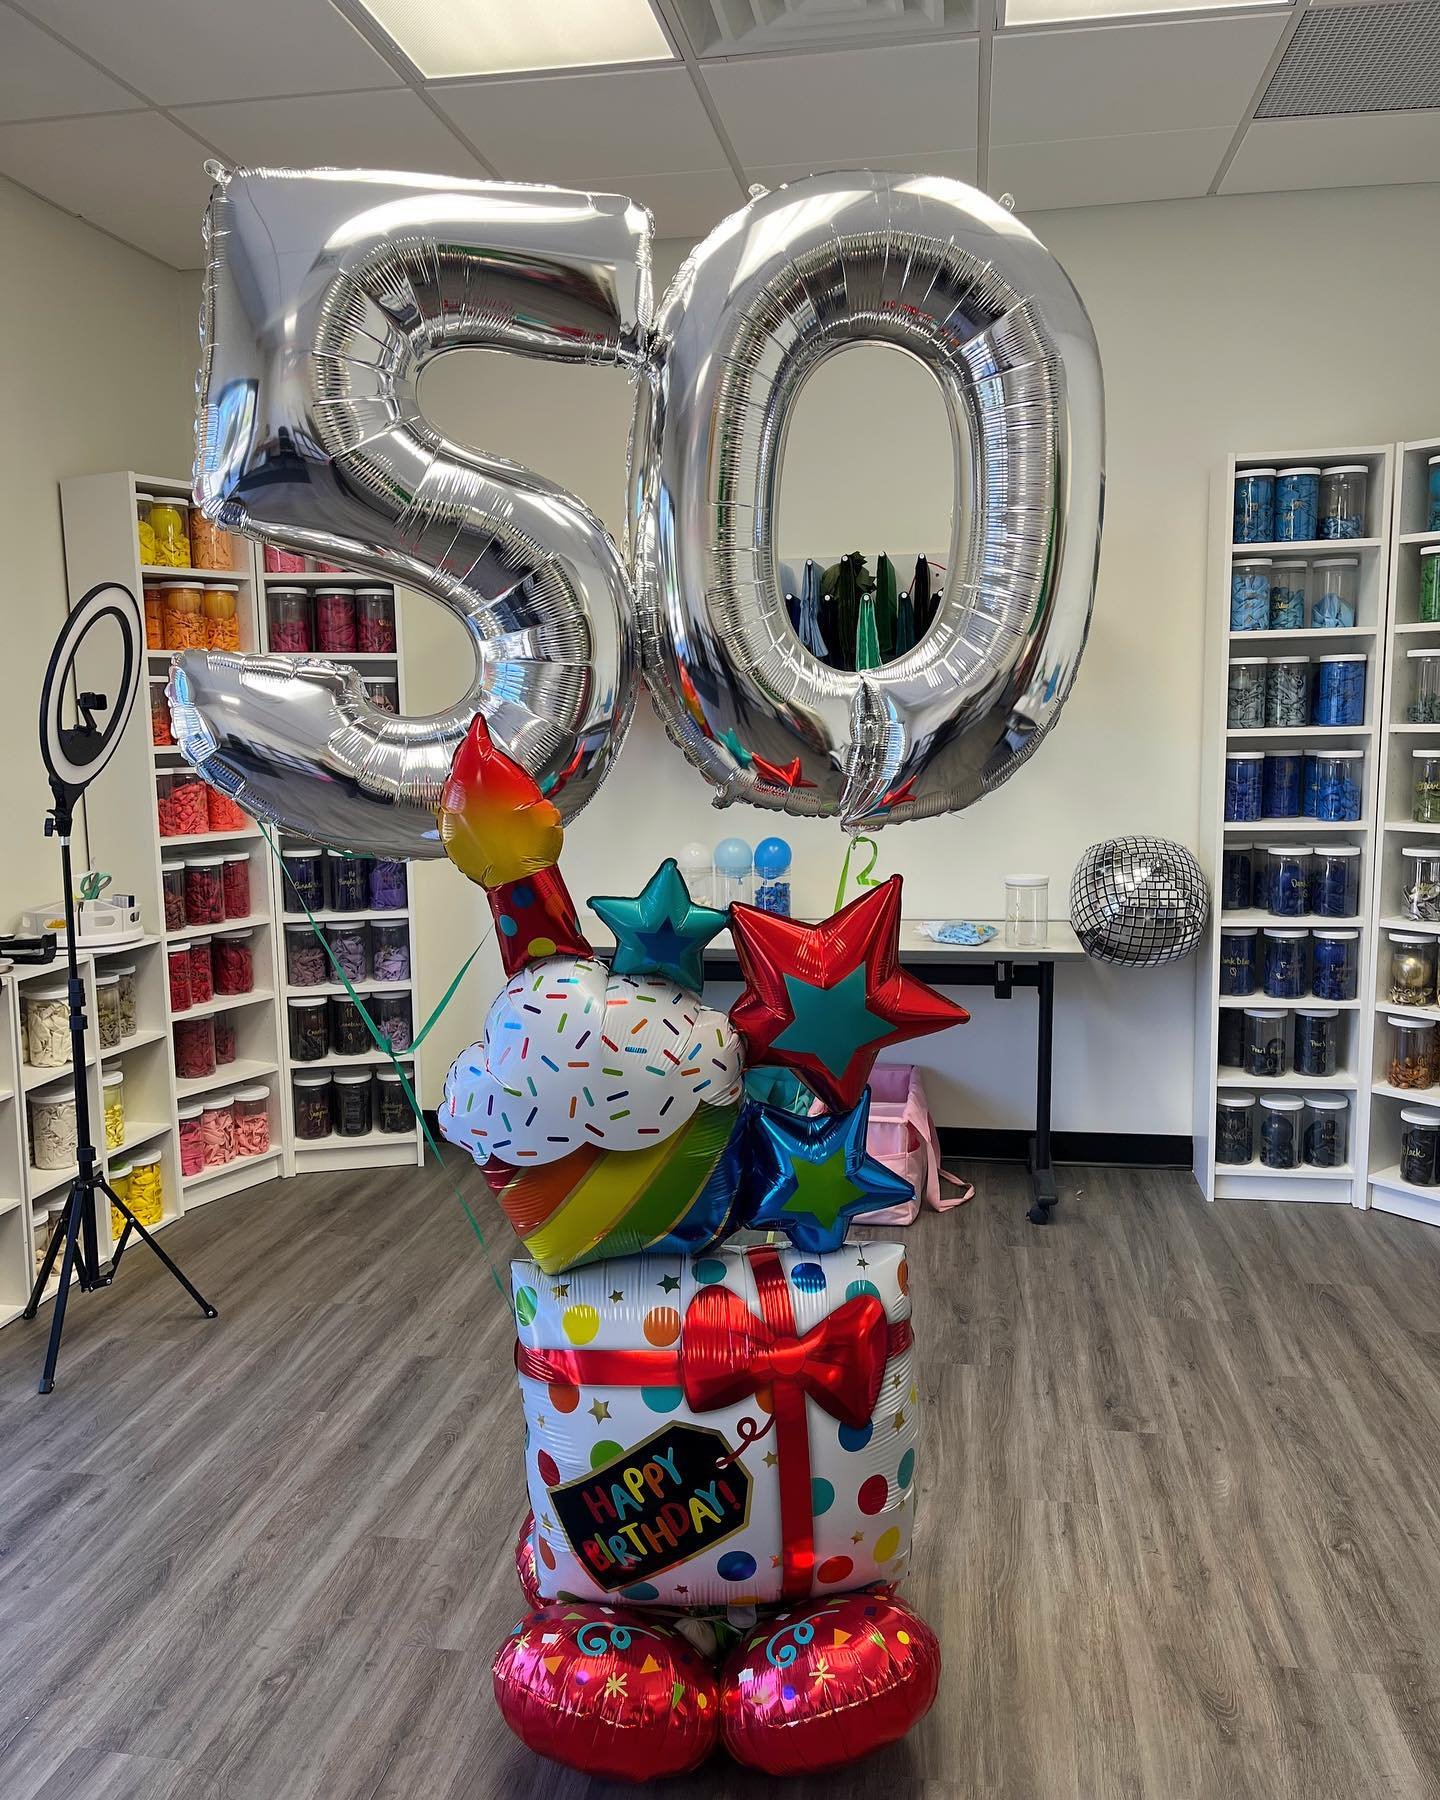 Have a birthday coming up? We&rsquo;ve got you covered! Big or small, our balloons will help you celebrate!🎉🎈
-
-
-
-
#balloontheorystl #balloons #balloonart #balloondecor #balloondecoration #balloonartist #birthdayballoons #birthdayballoon #birthd